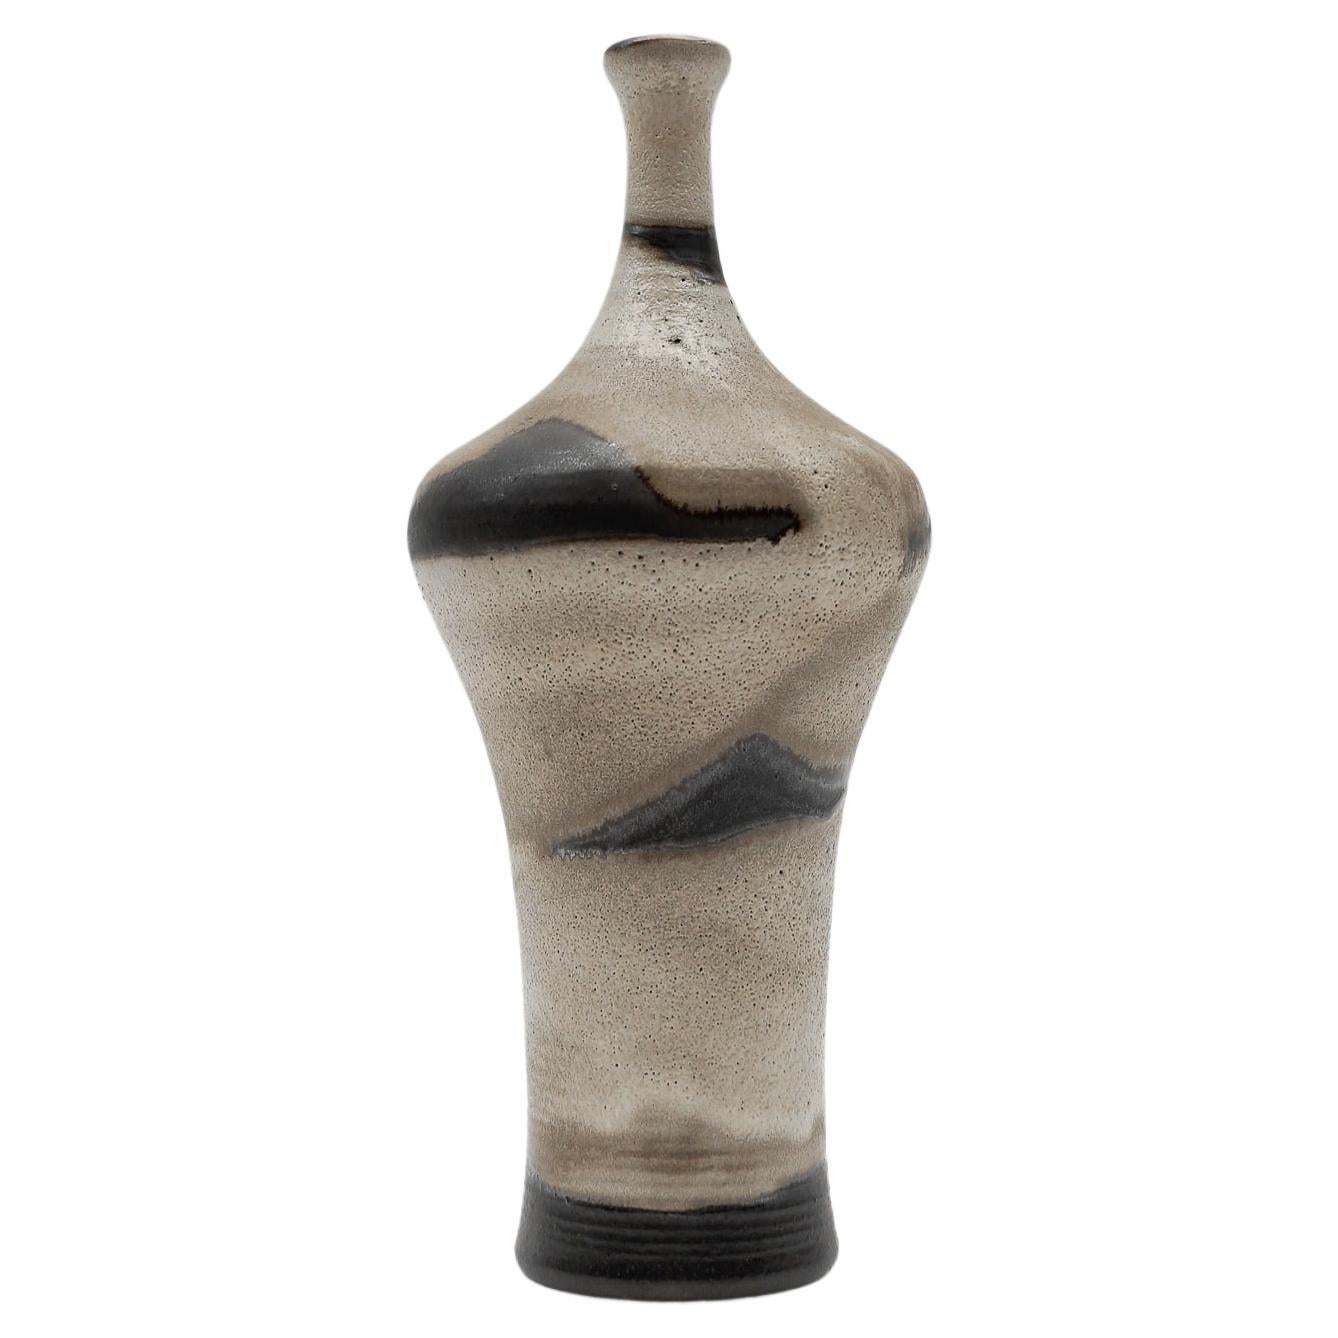 Studio Ceramic Vase by Elly Kuch for Wilhelm & Elly KUCH, 1960s, Germany For Sale